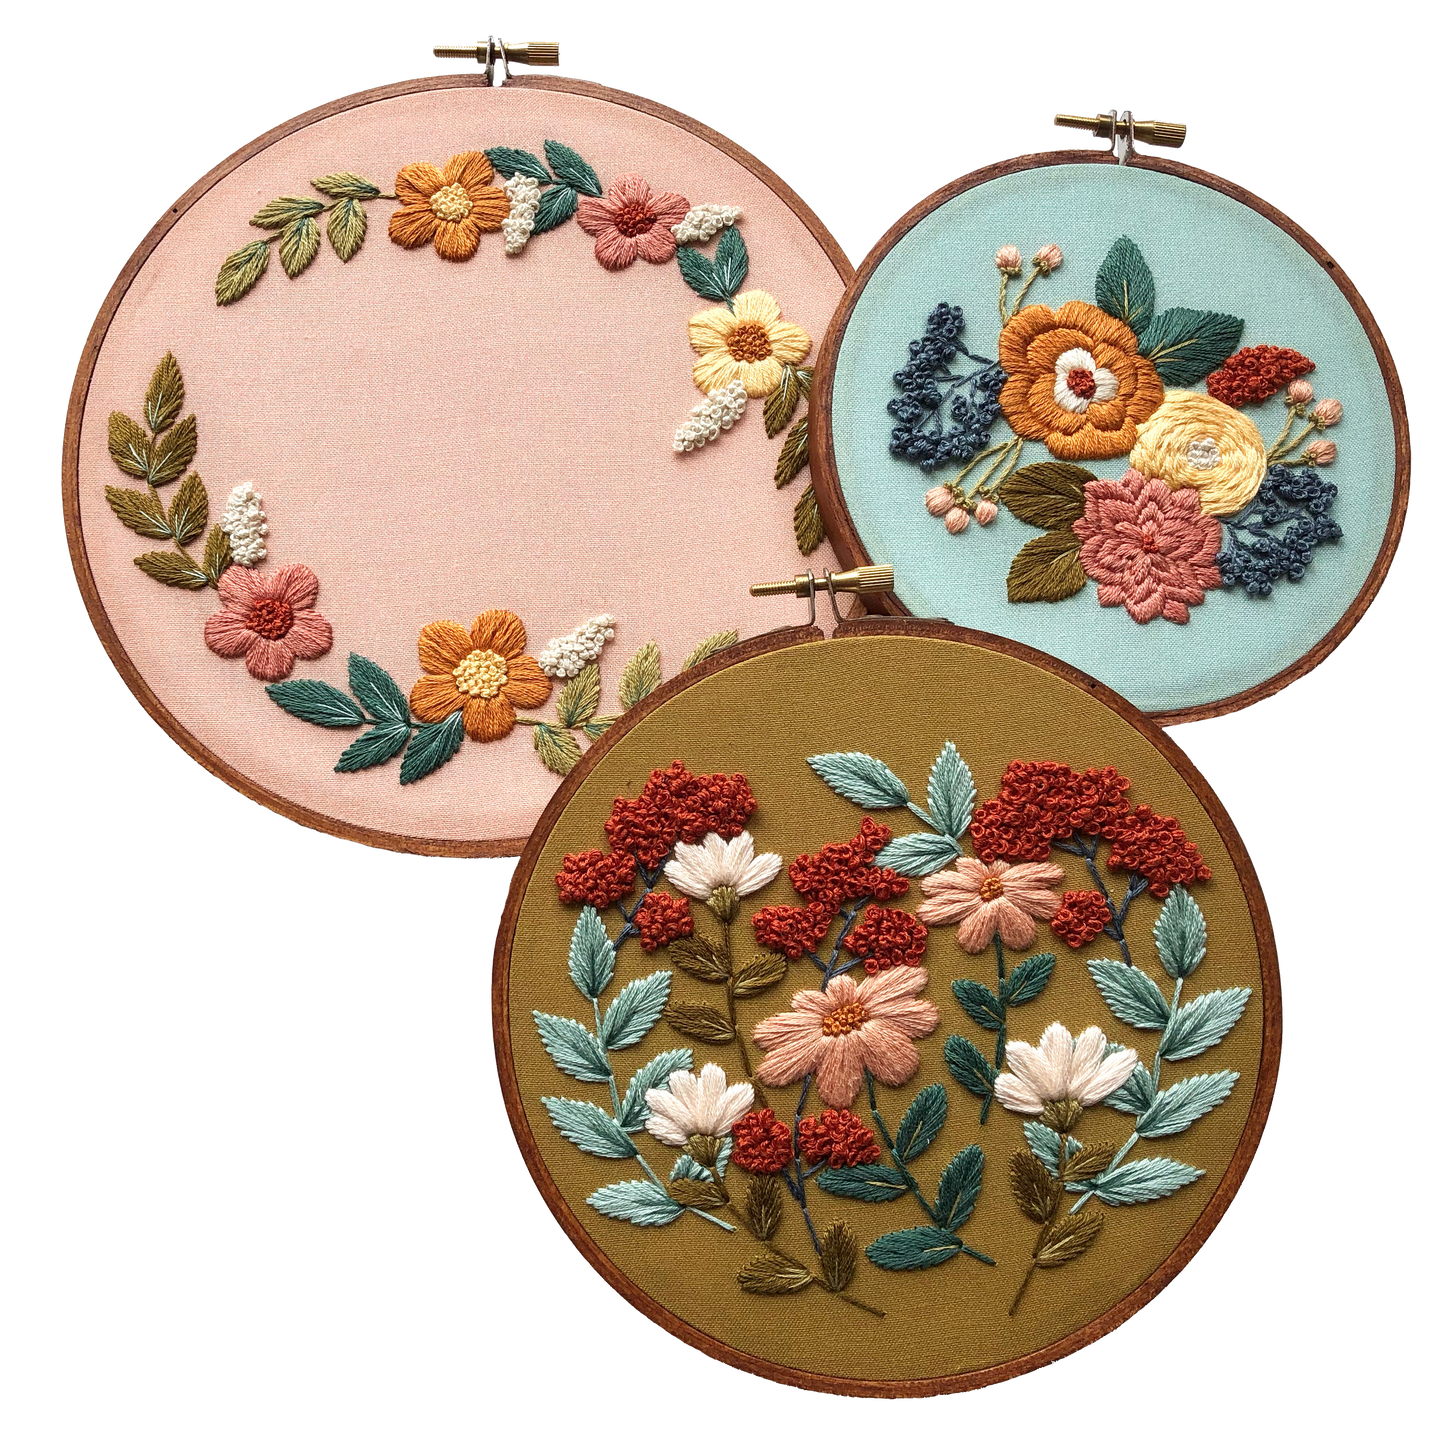 Hand Embroidery Kit - Three Designs in One Kit